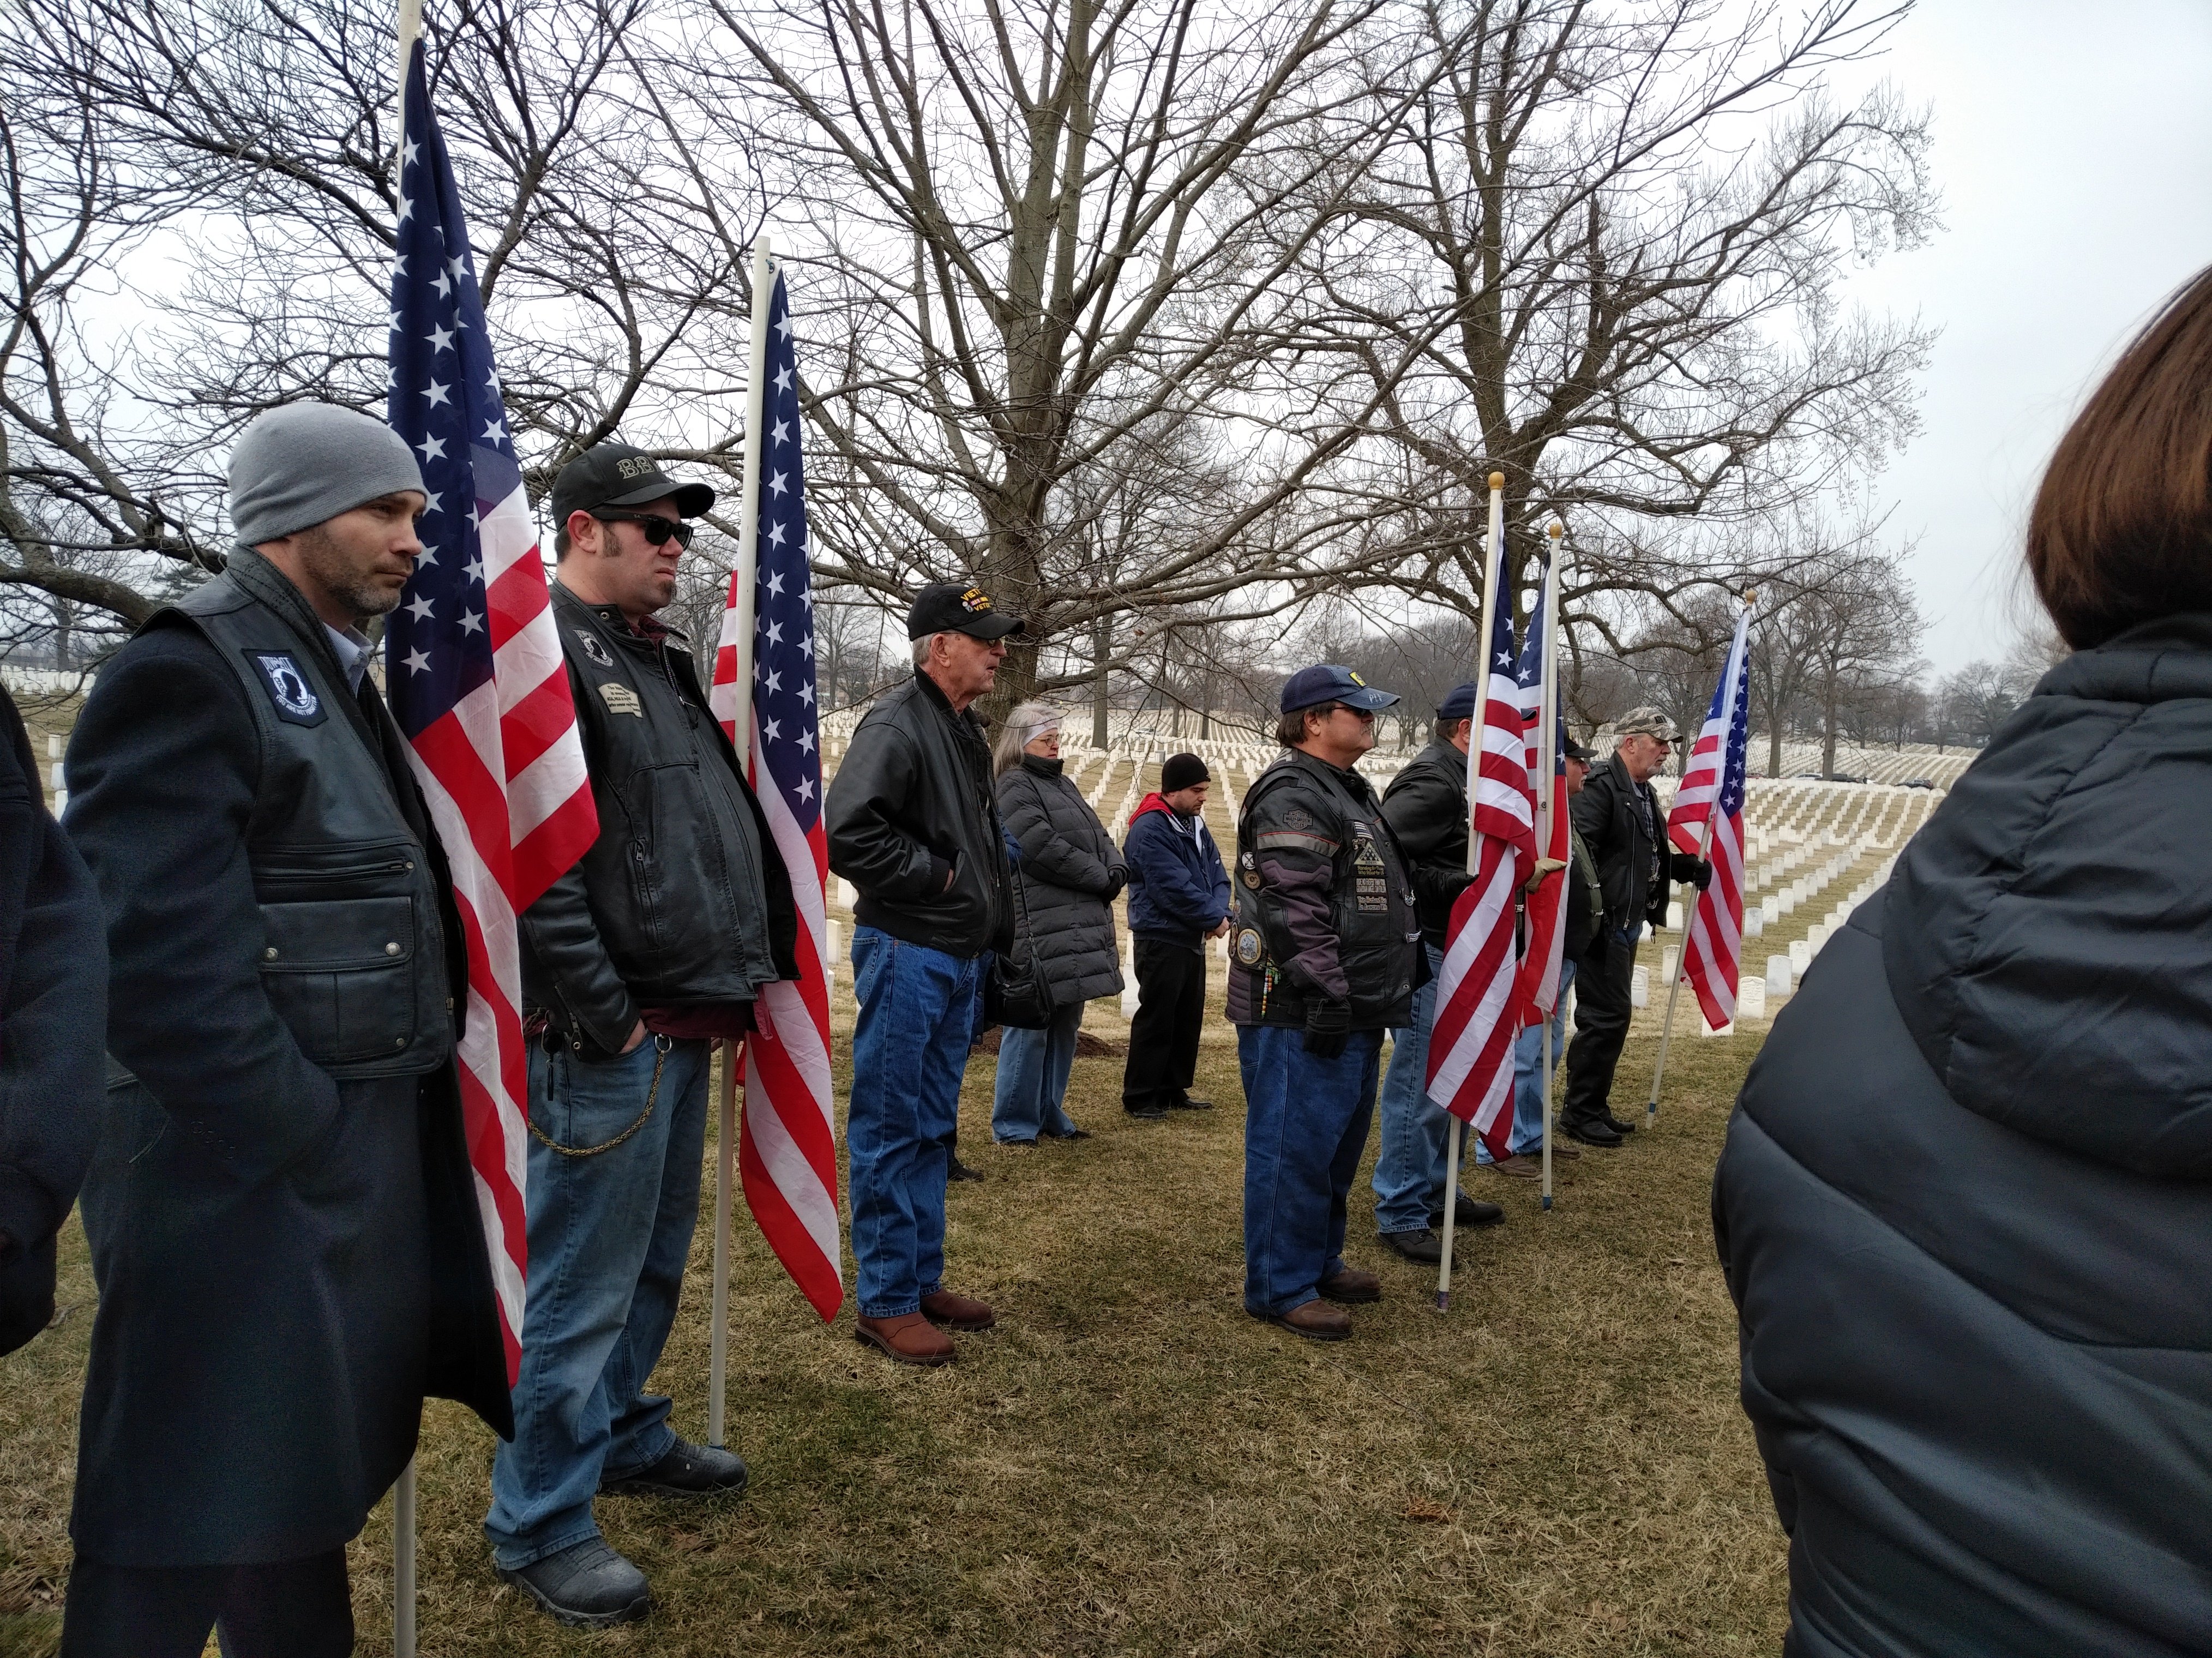 Local citizens attend the funeral of Air Force veteran SGT Robert Wunderlich at Jefferson Barracks National Cemetery. Virginia Kruta/The Daily Caller